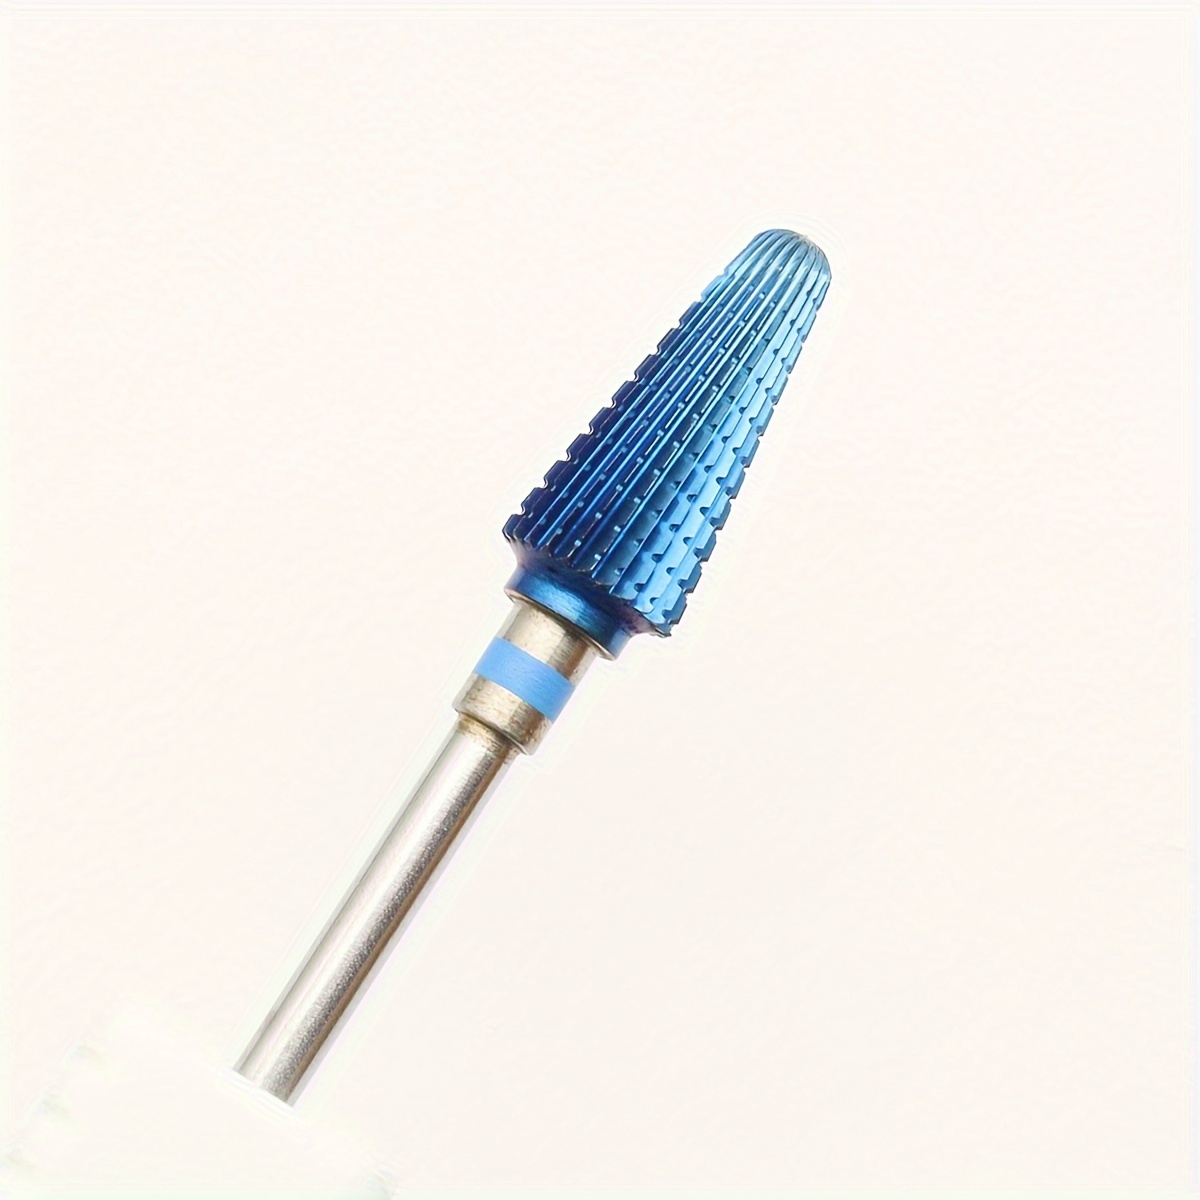 

1pc Blue 2way Carbide Nail Drill Bits, 3/32" Tornado Carbide Bit Milling Cutters For Manicure Pedicure Nails Accessories Tools